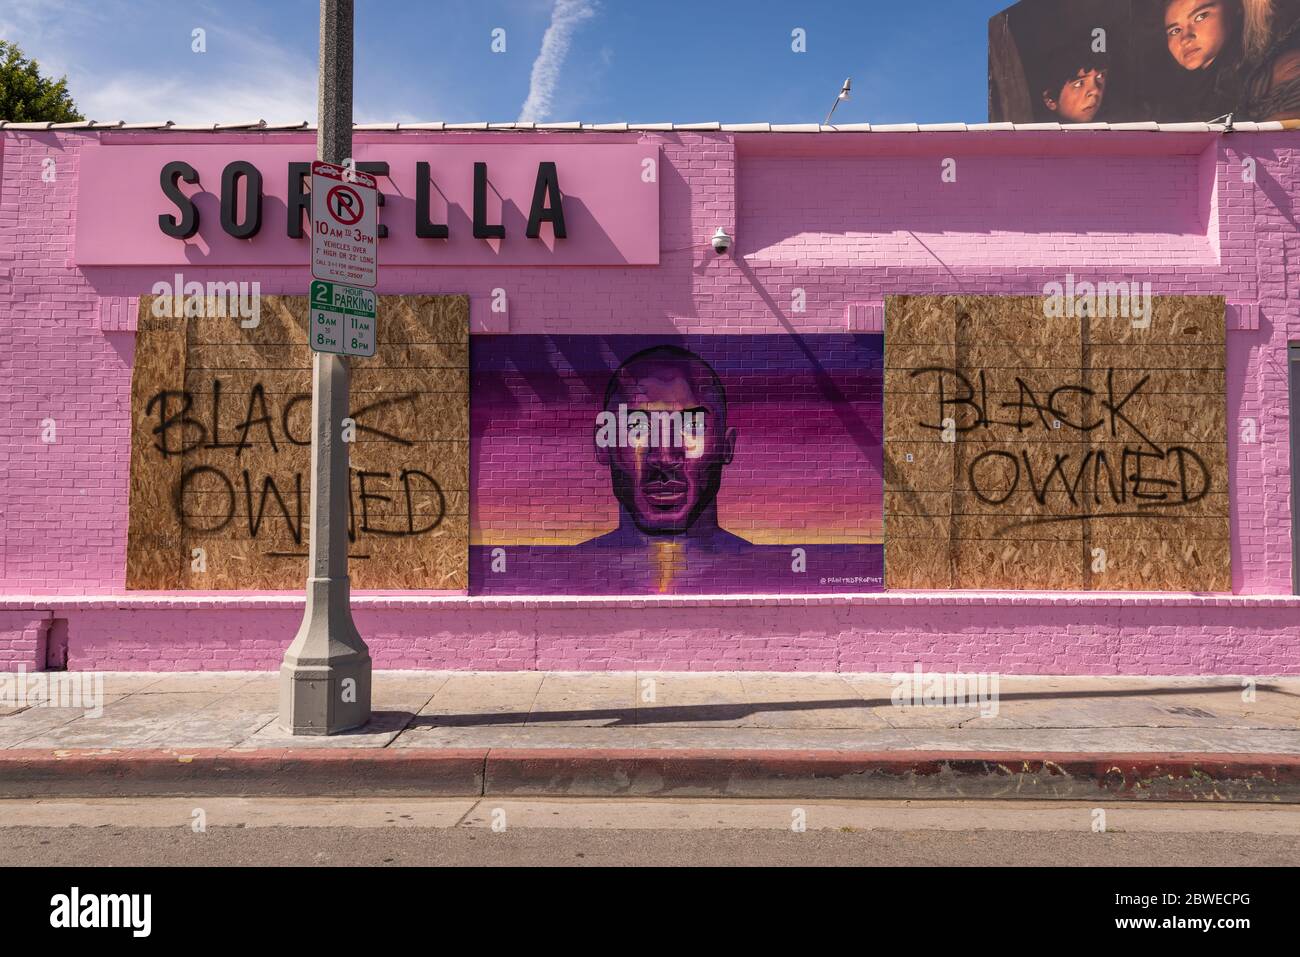 Los Angeles, USA. 31st May, 2020. Retail store on Melrose Avenue in Los Angeles following George Floyd protests in Los Angeles, USA. Credit: Jim Newberry/Alamy Live News. Stock Photo